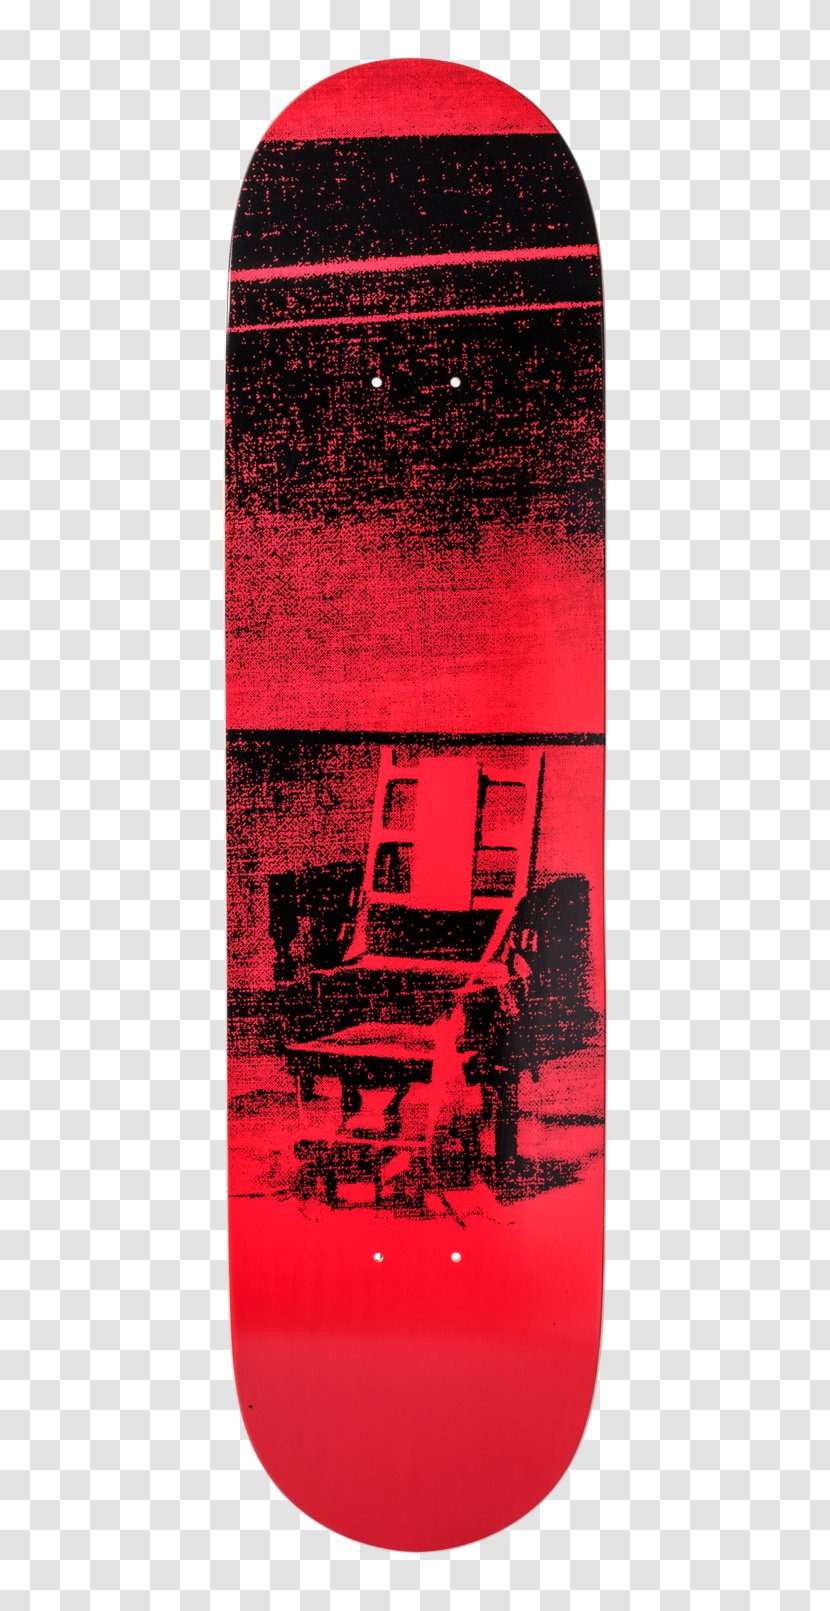 Artist Electric Chair Automotive Tail & Brake Light Electricity - Stock - Andy Warhol Transparent PNG